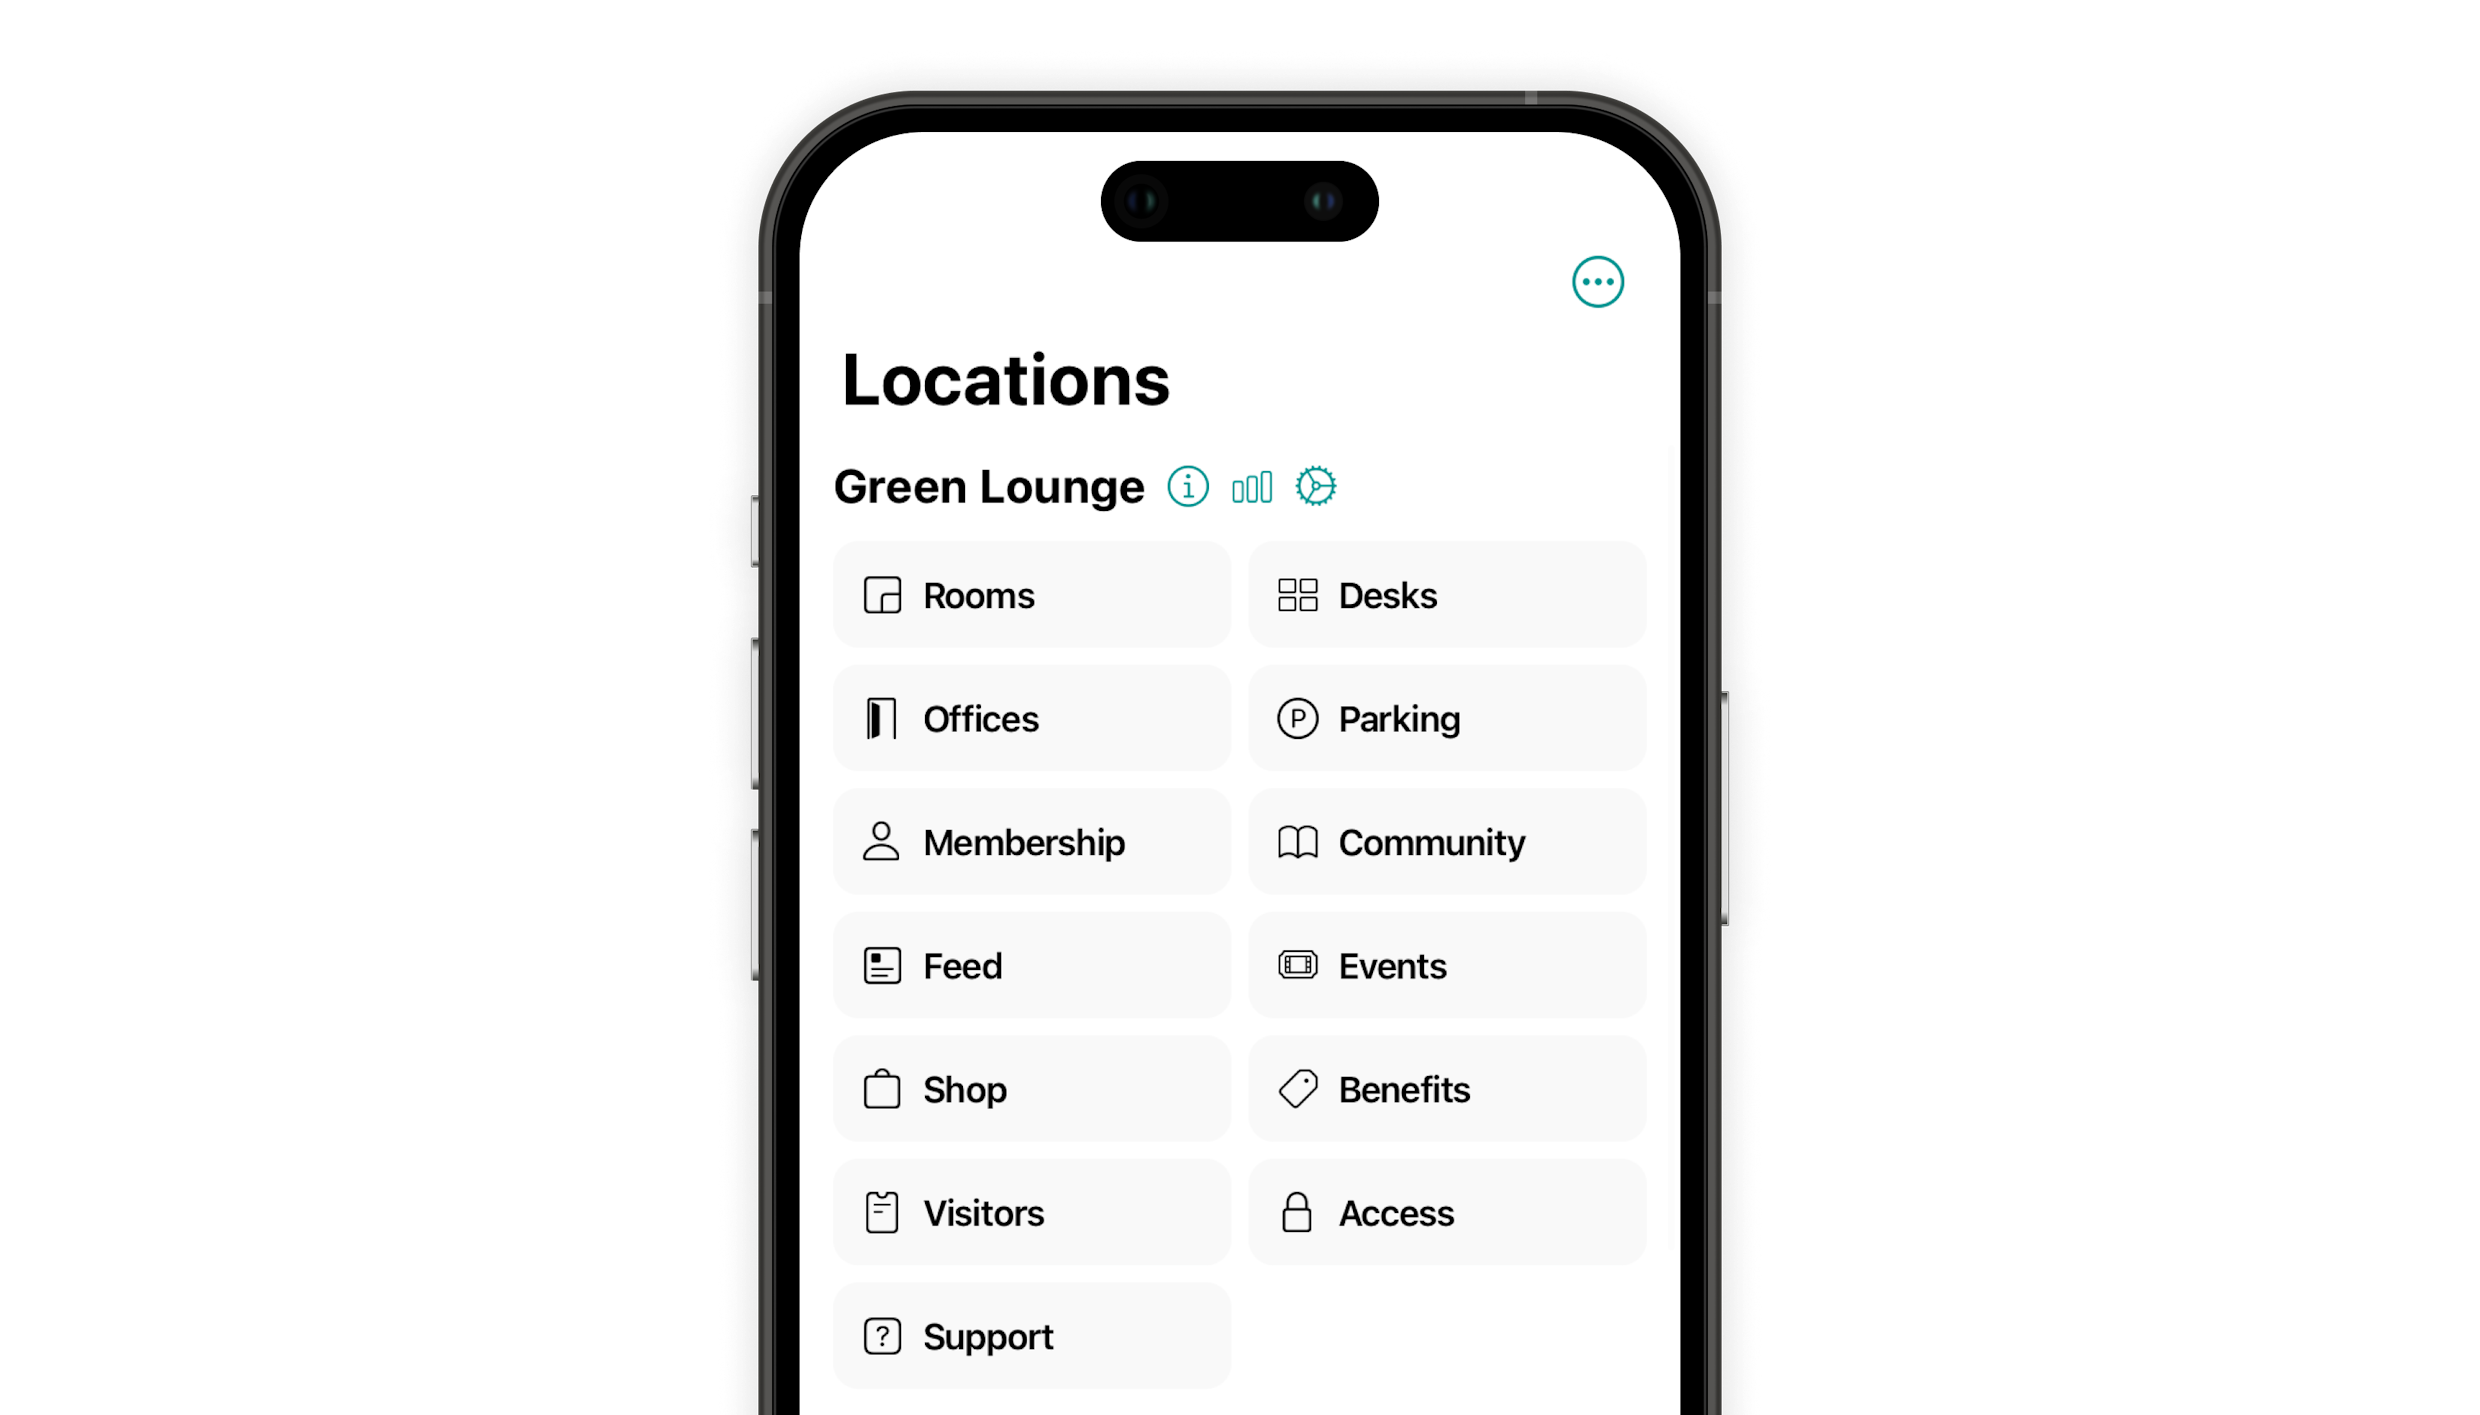 Spacebring coworking space management software interface with new benefit displayed as a red dot on the Benefits button